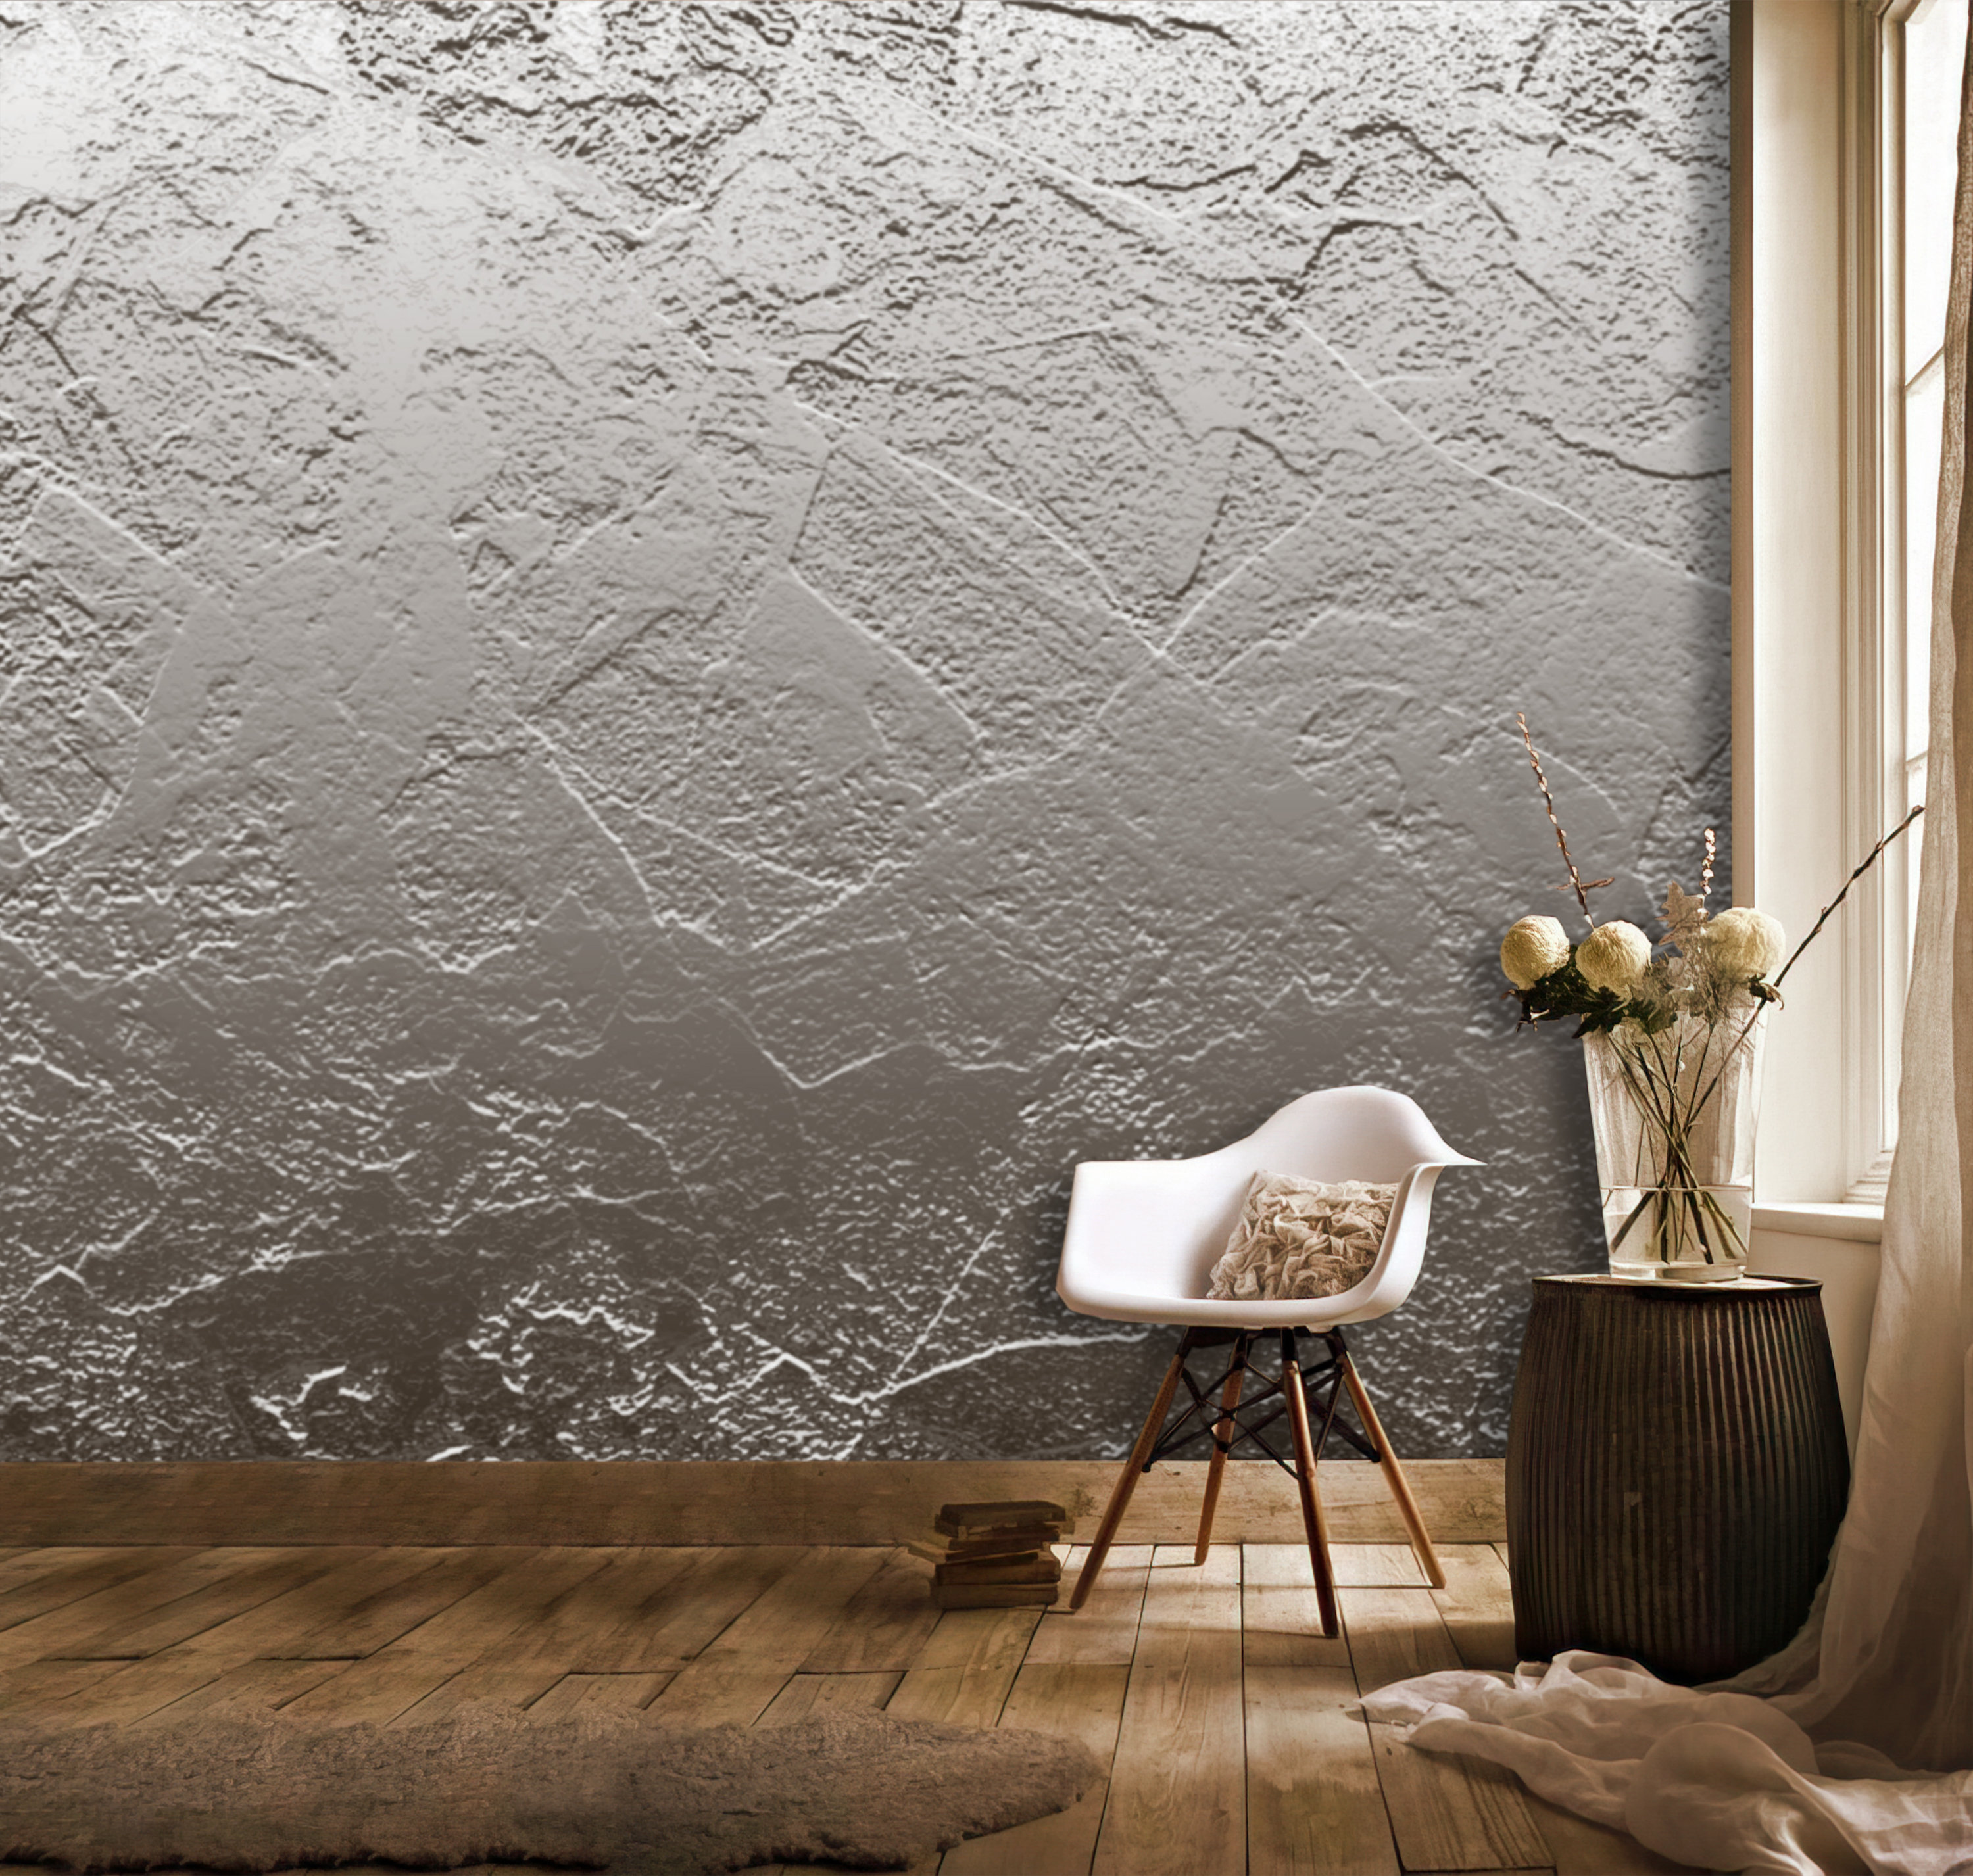 stucco veneziano gris.  Luxury ceiling design, Venetian plaster walls,  French country color palette